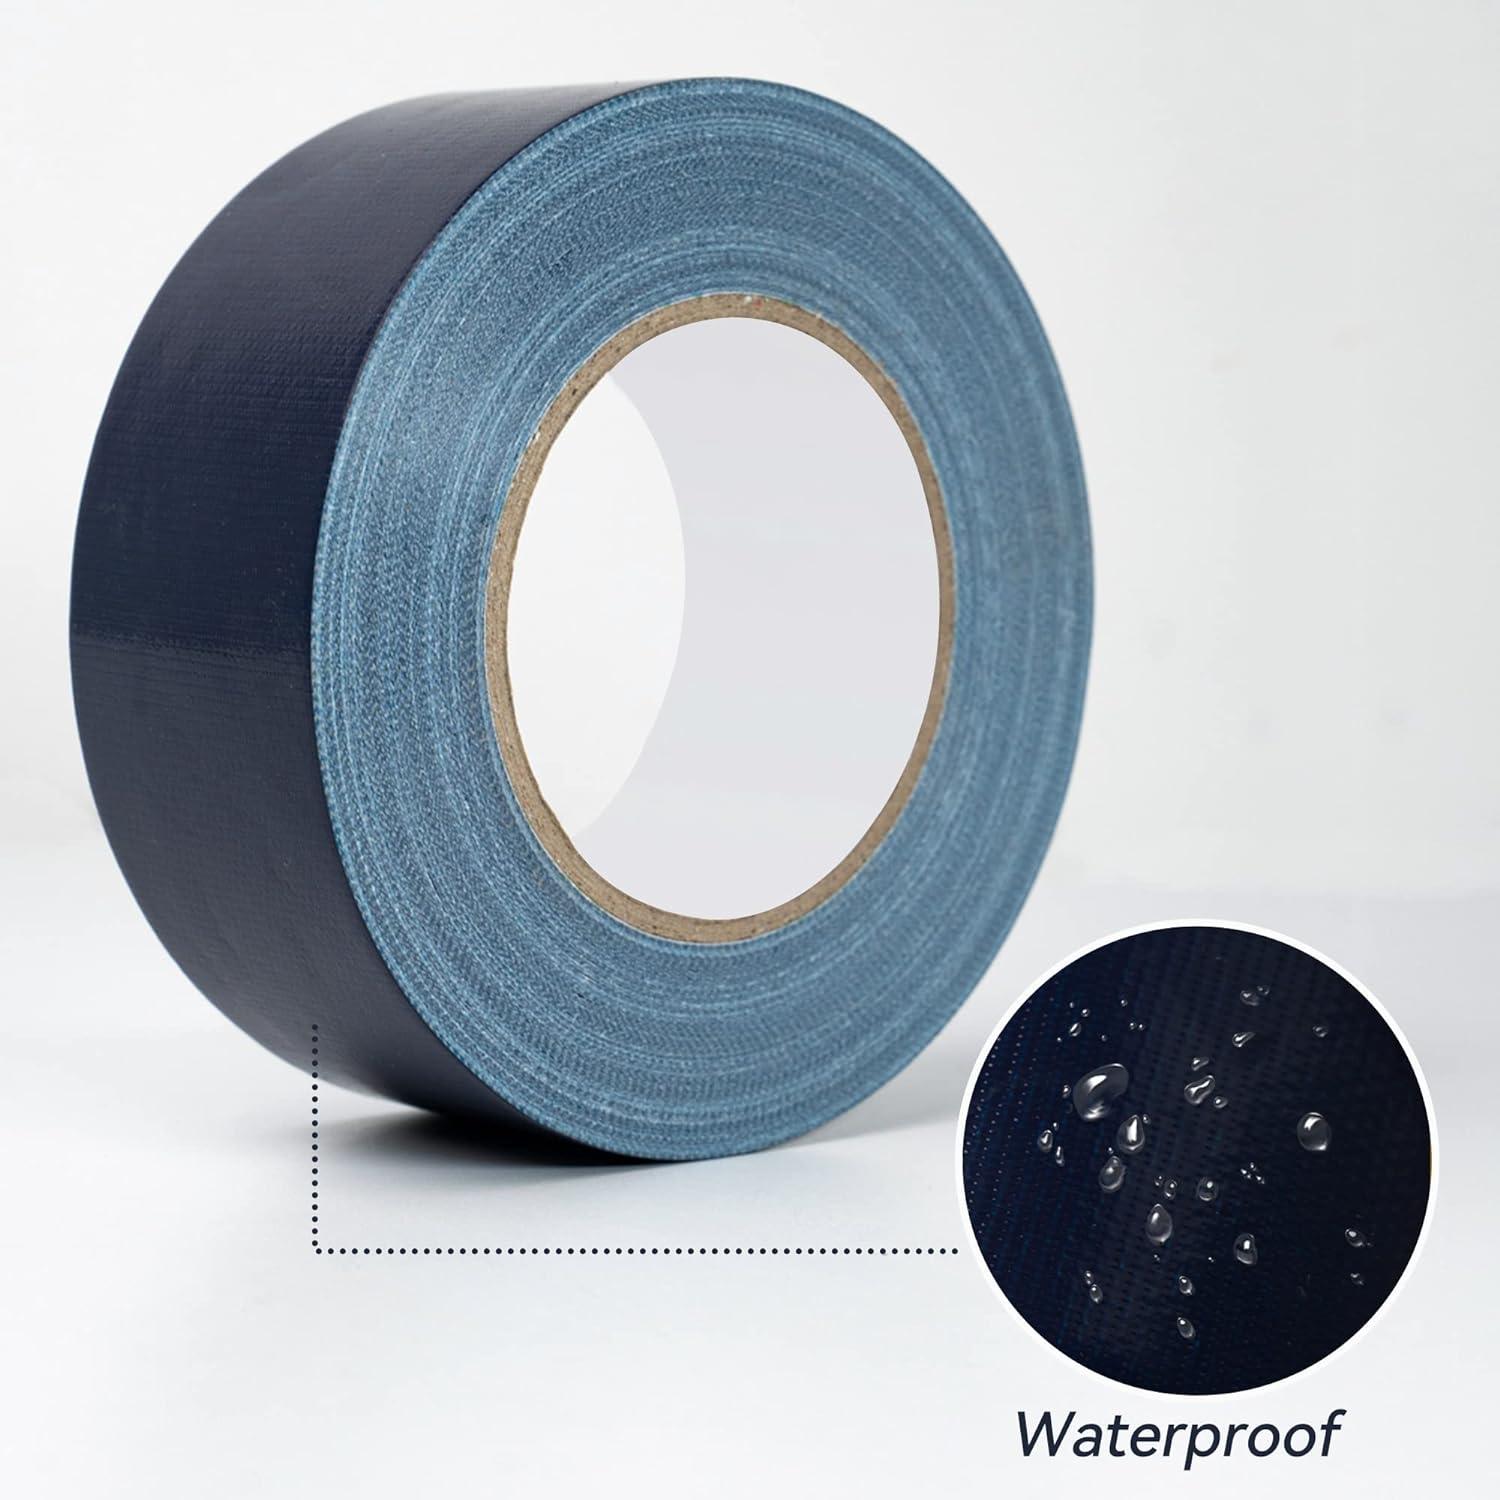 Reniteco Navy Blue Duct Tape- 2 inches x 10 Yards Heavy Duty Duct Tape  Waterproof Resistant NO-Residue UV Blocking Pack of 1 2 10yard Navy Blue